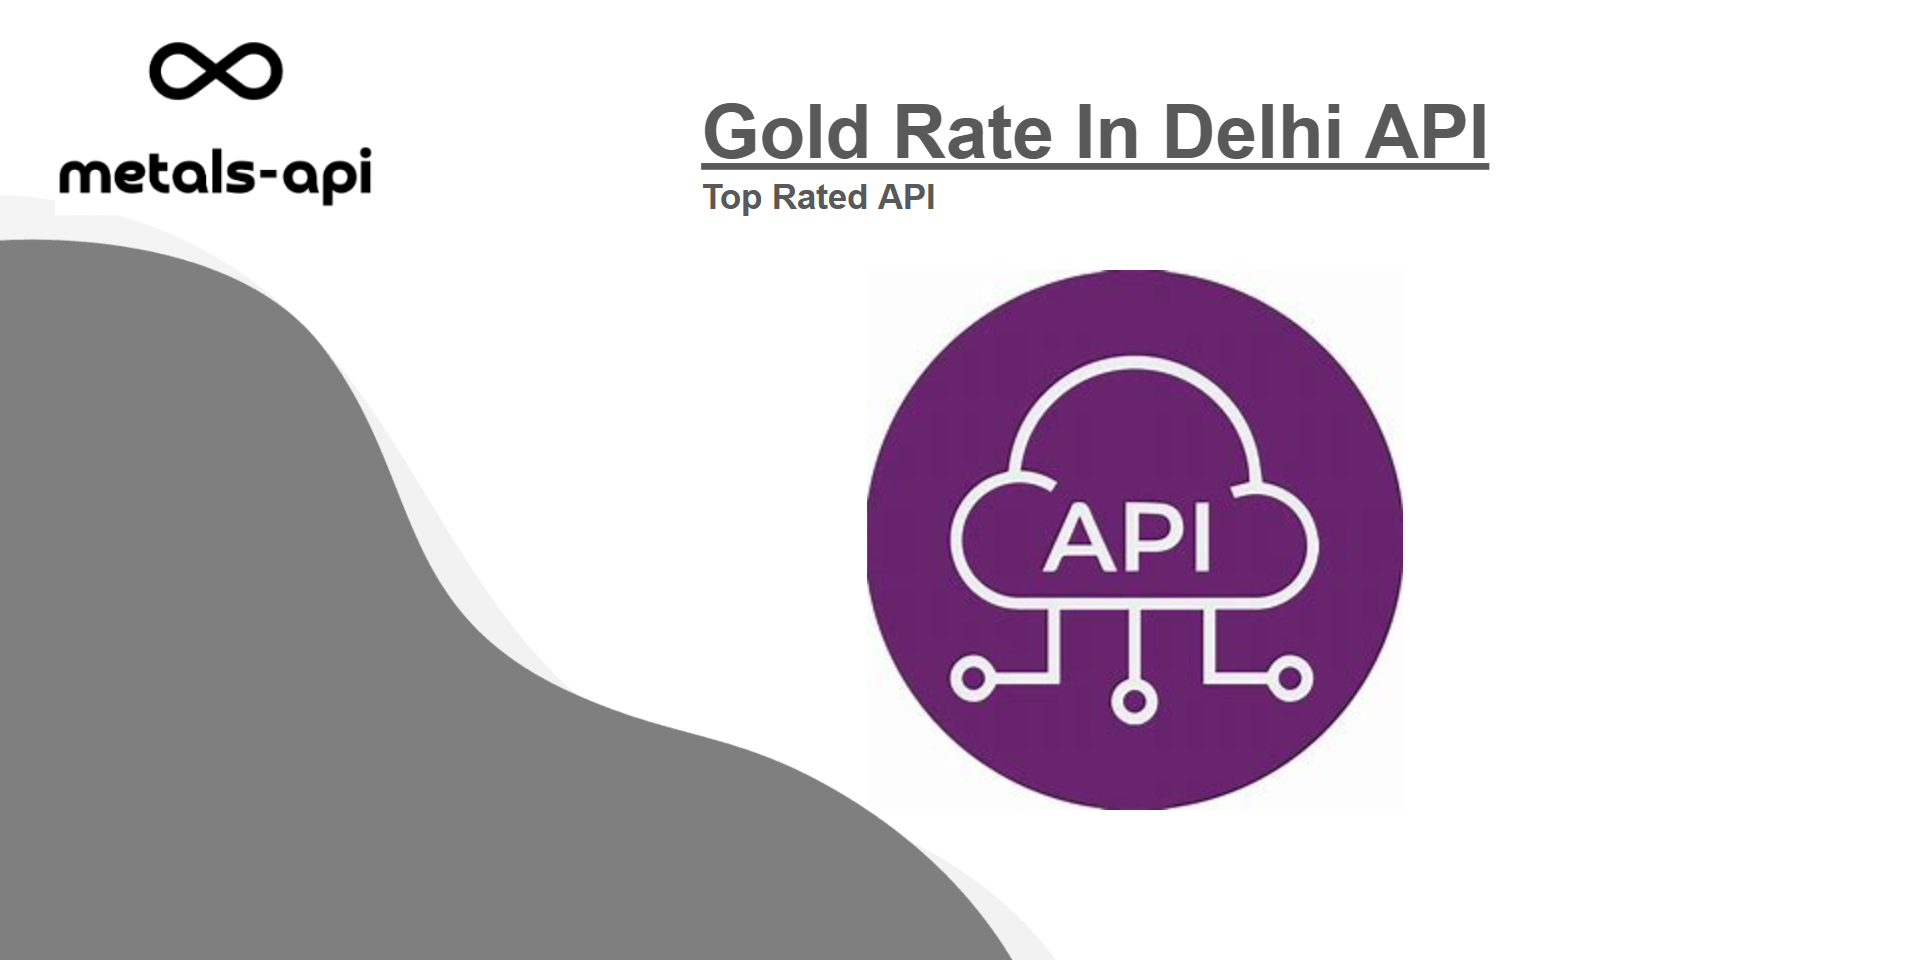 Top Rated API To Get Gold Rate In Delhi